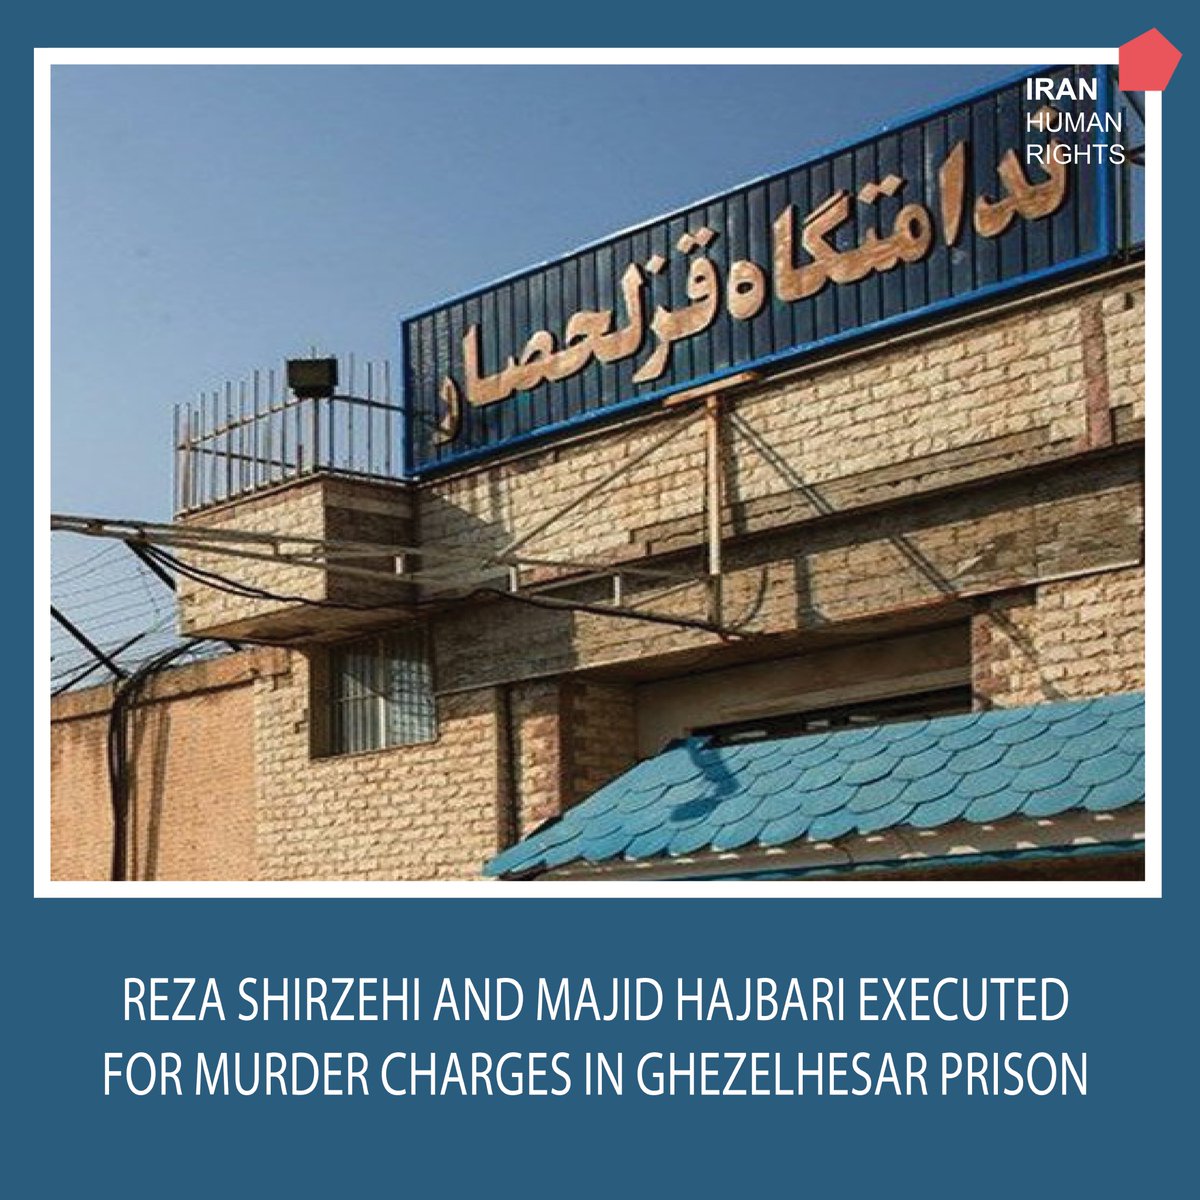 #Iran state media reported the execution of two men in Ghezelhesar Prison on 1st May. IHRNGO has established the men's identities as Reza Shirzehi and Majid Hajbari who were sentenced to qisas (retribution-in-kind) for murder. They were executed with Kurdish-Sunni political…